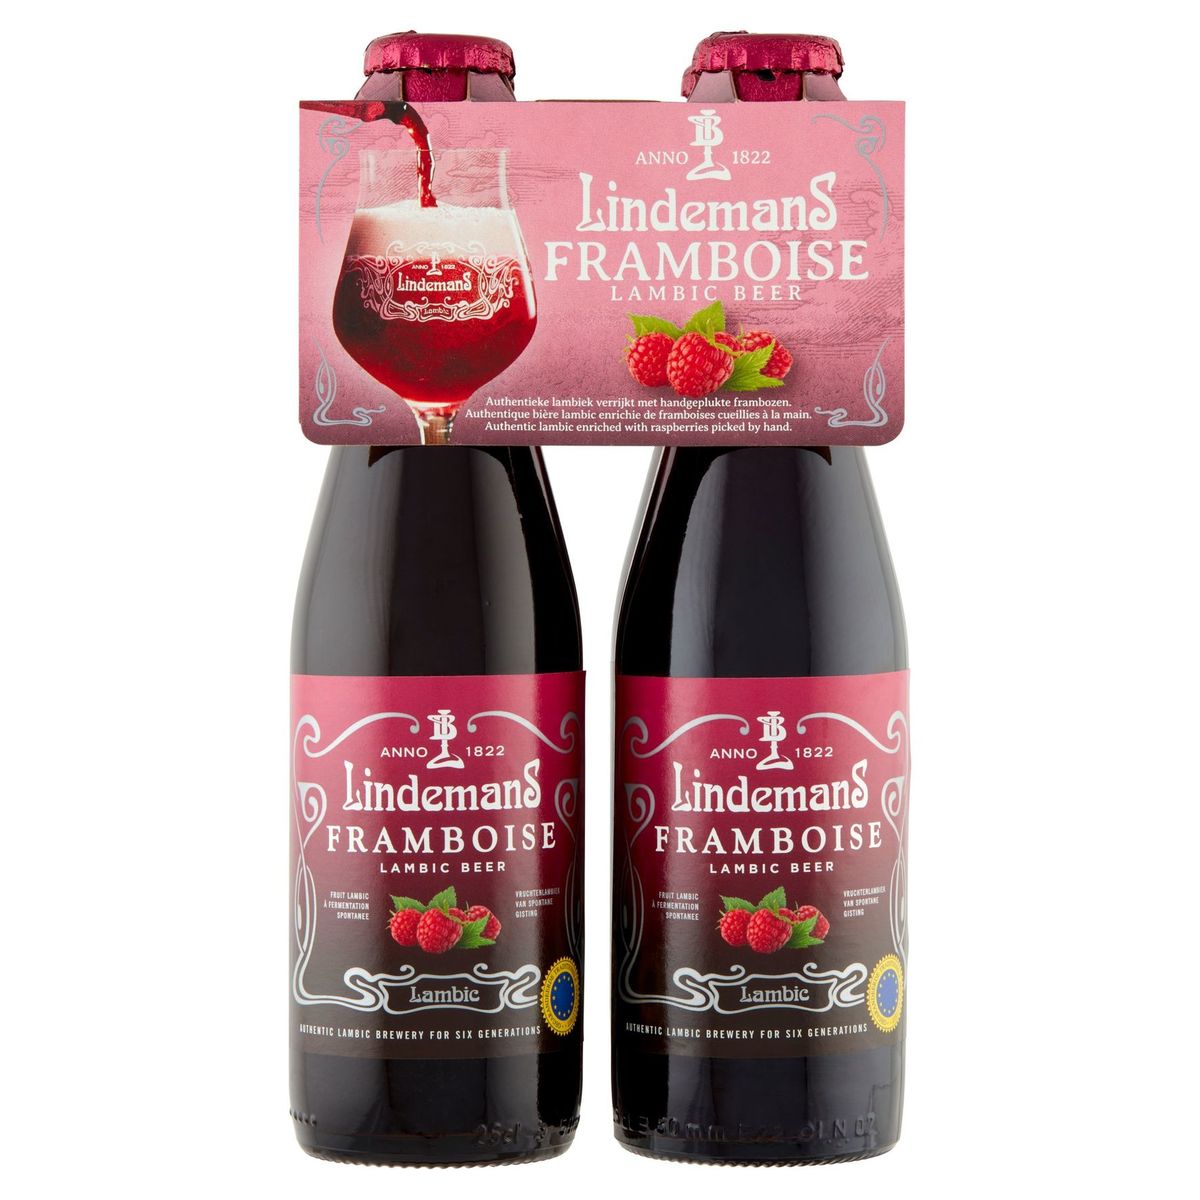 Lindemans Framboise Lambic Beer Bouteilles 4 x 250 ml